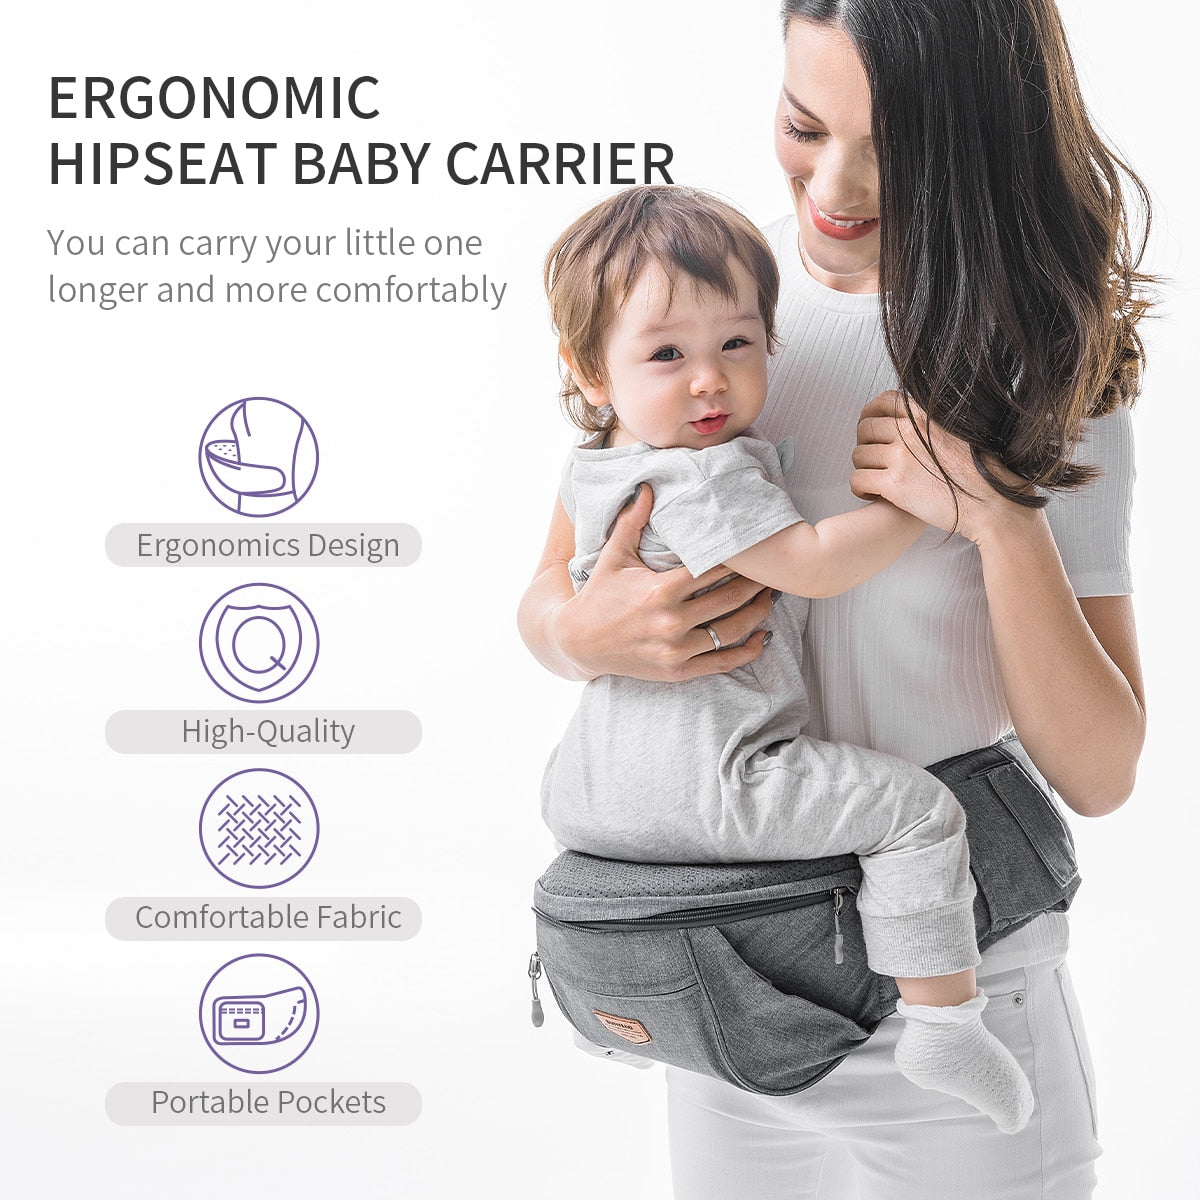 a hapy young woman hugging her little one who is sitting on a baby carrier wich helps mom reduce back load and saves her from pain. This way she can carry her baby longer without getting too tired 